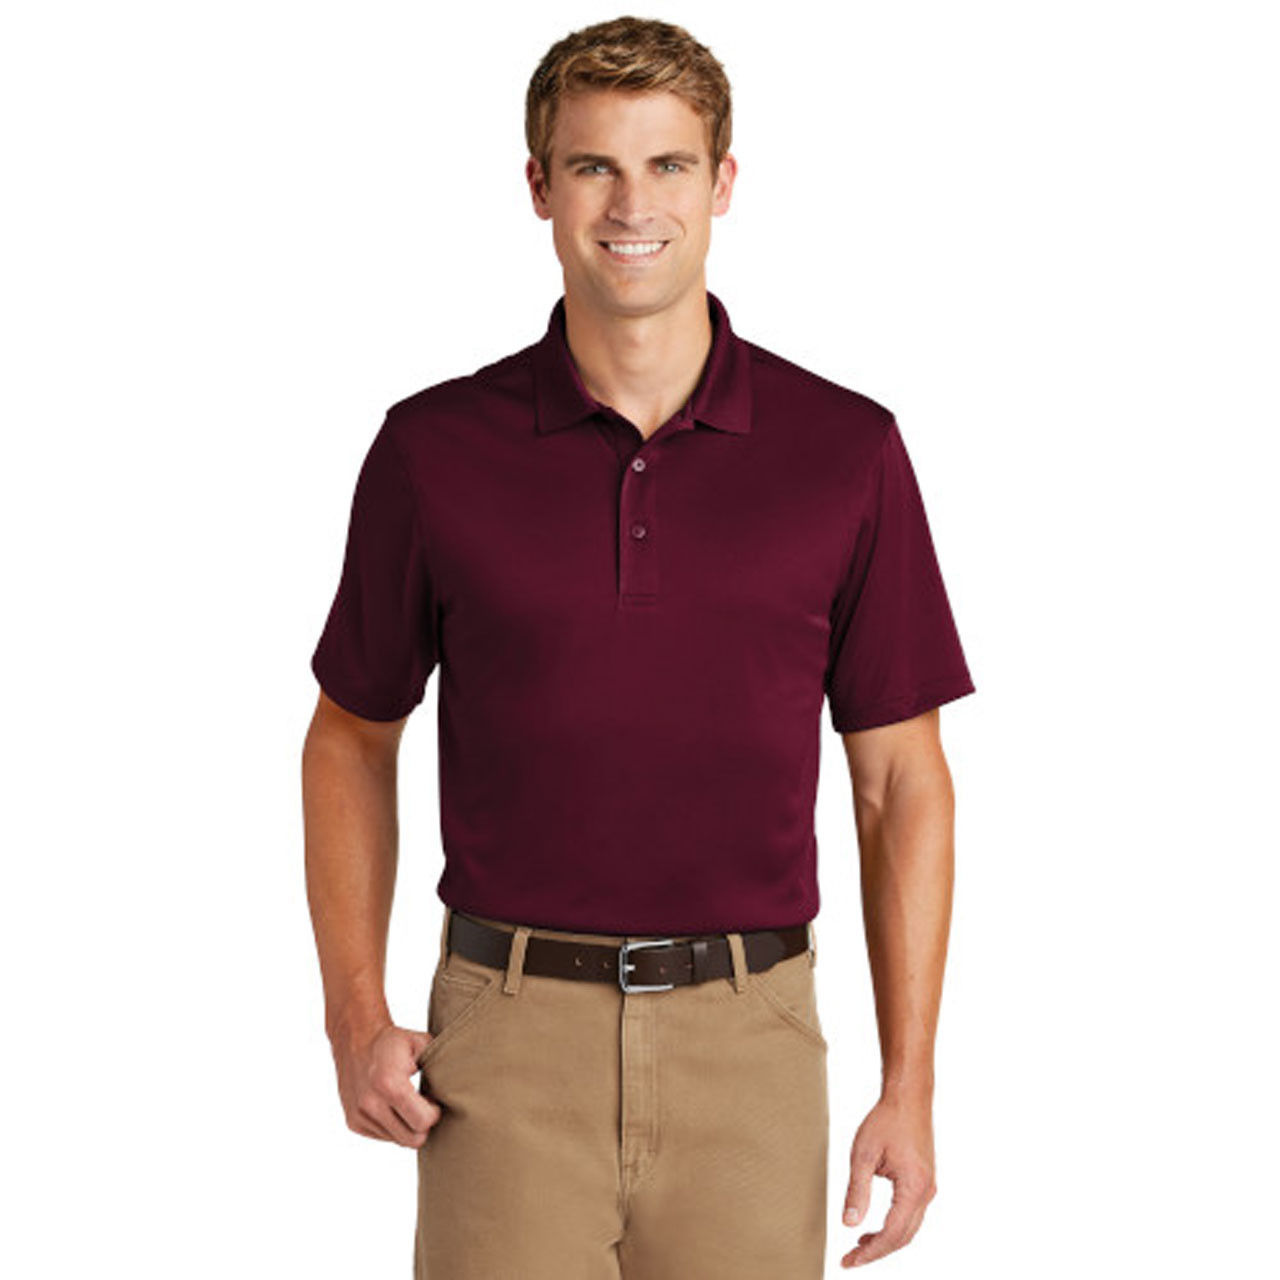 Does the men's maroon polo shirt have side vents?